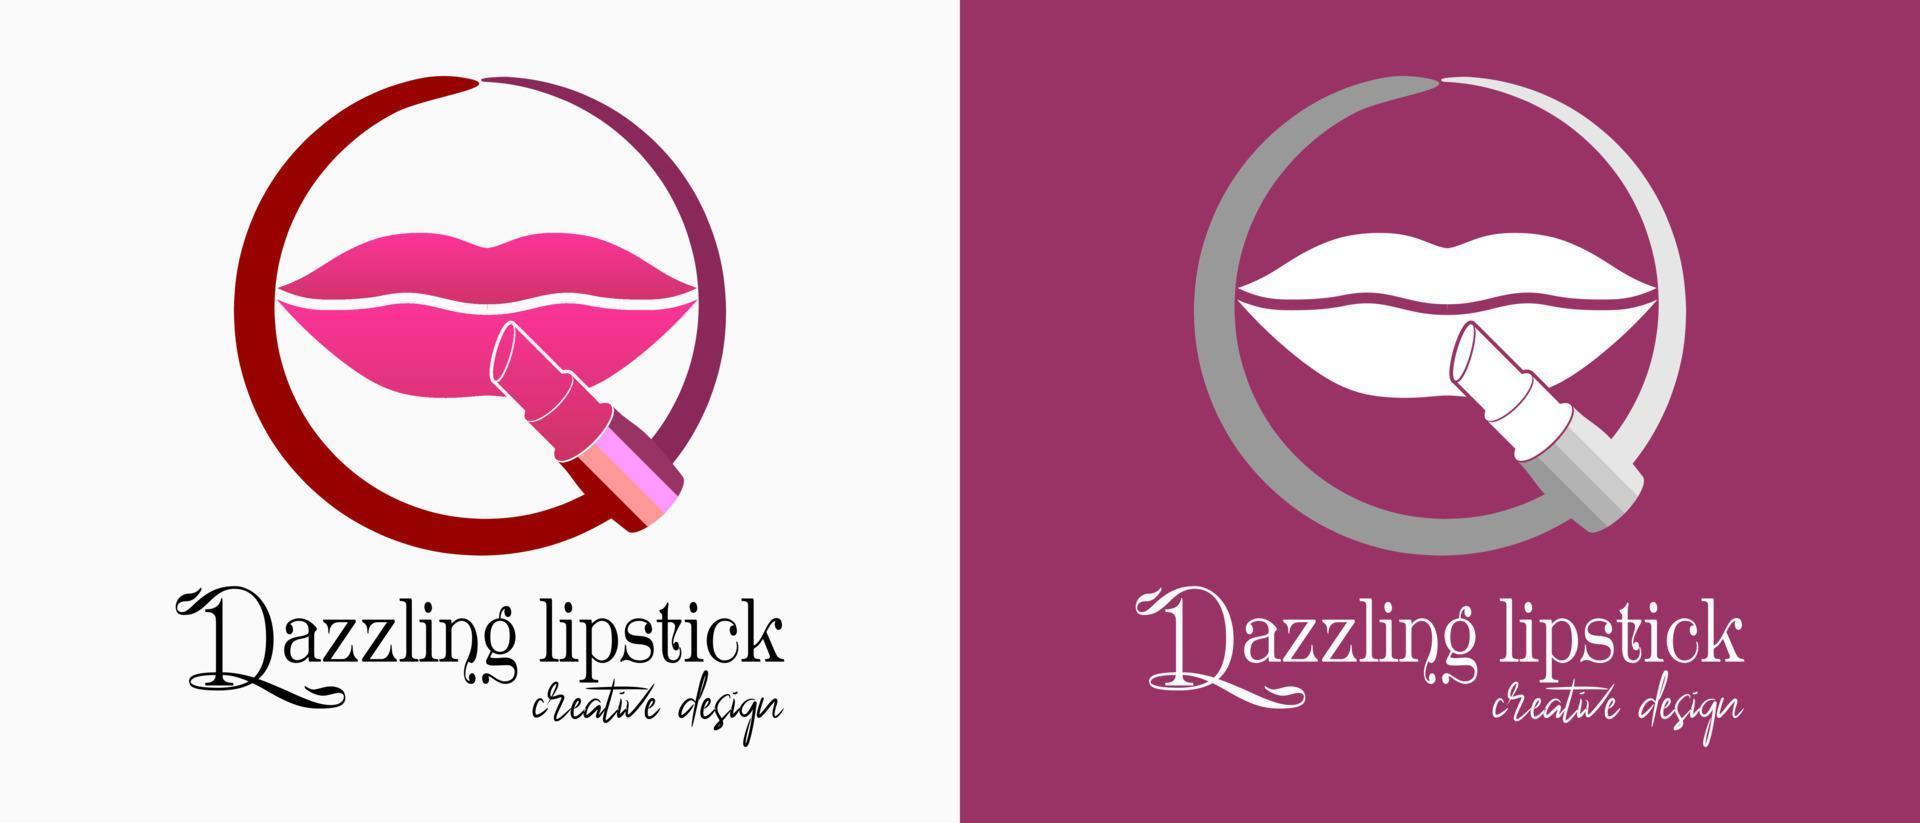 lipstick logo design with creative colorful concept lips icon in a circle line. premium vector makeup or lifestyle logo illustration